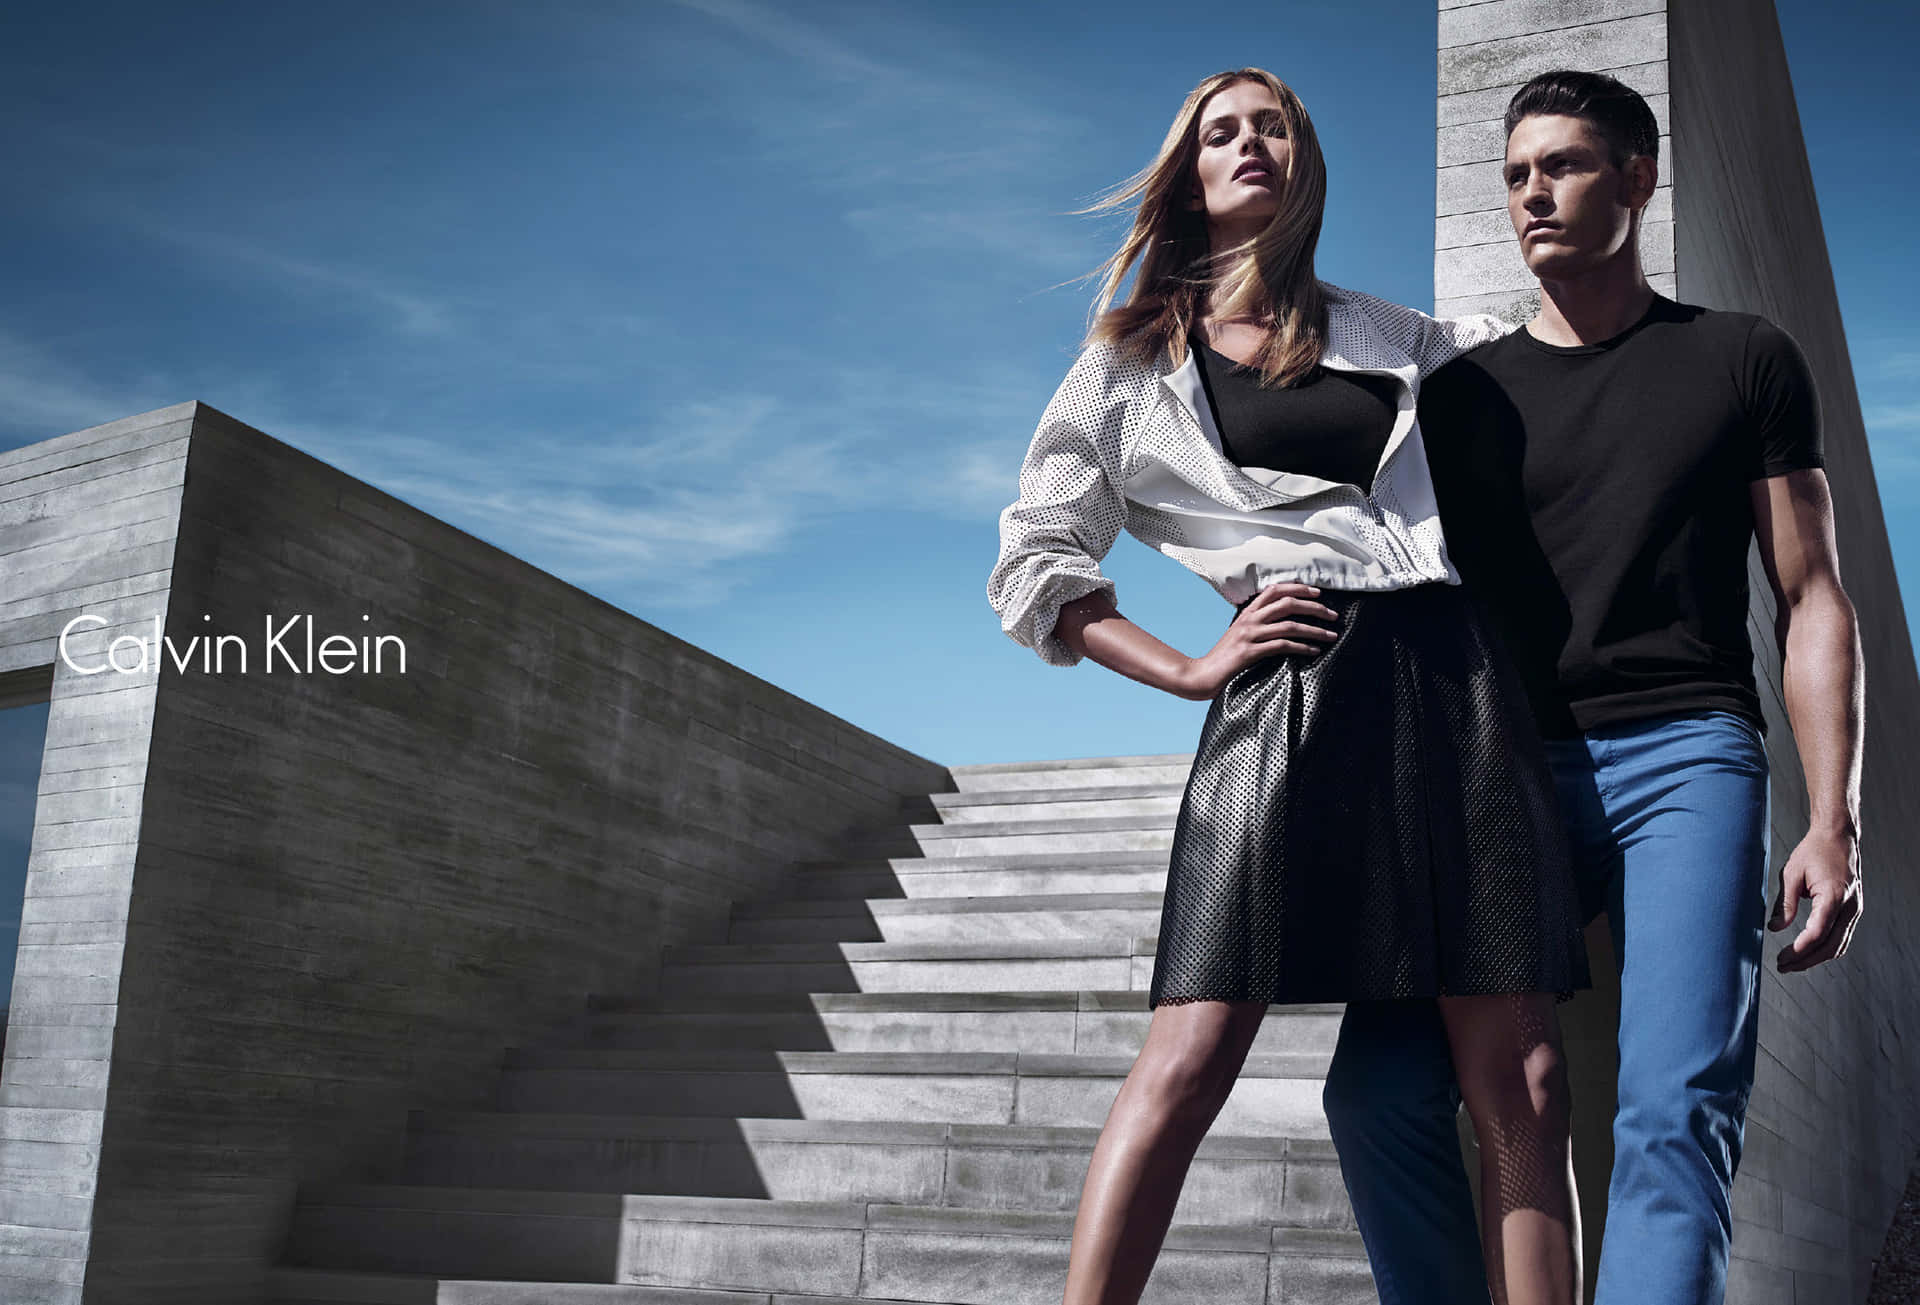 Join the world of Calvin Klein